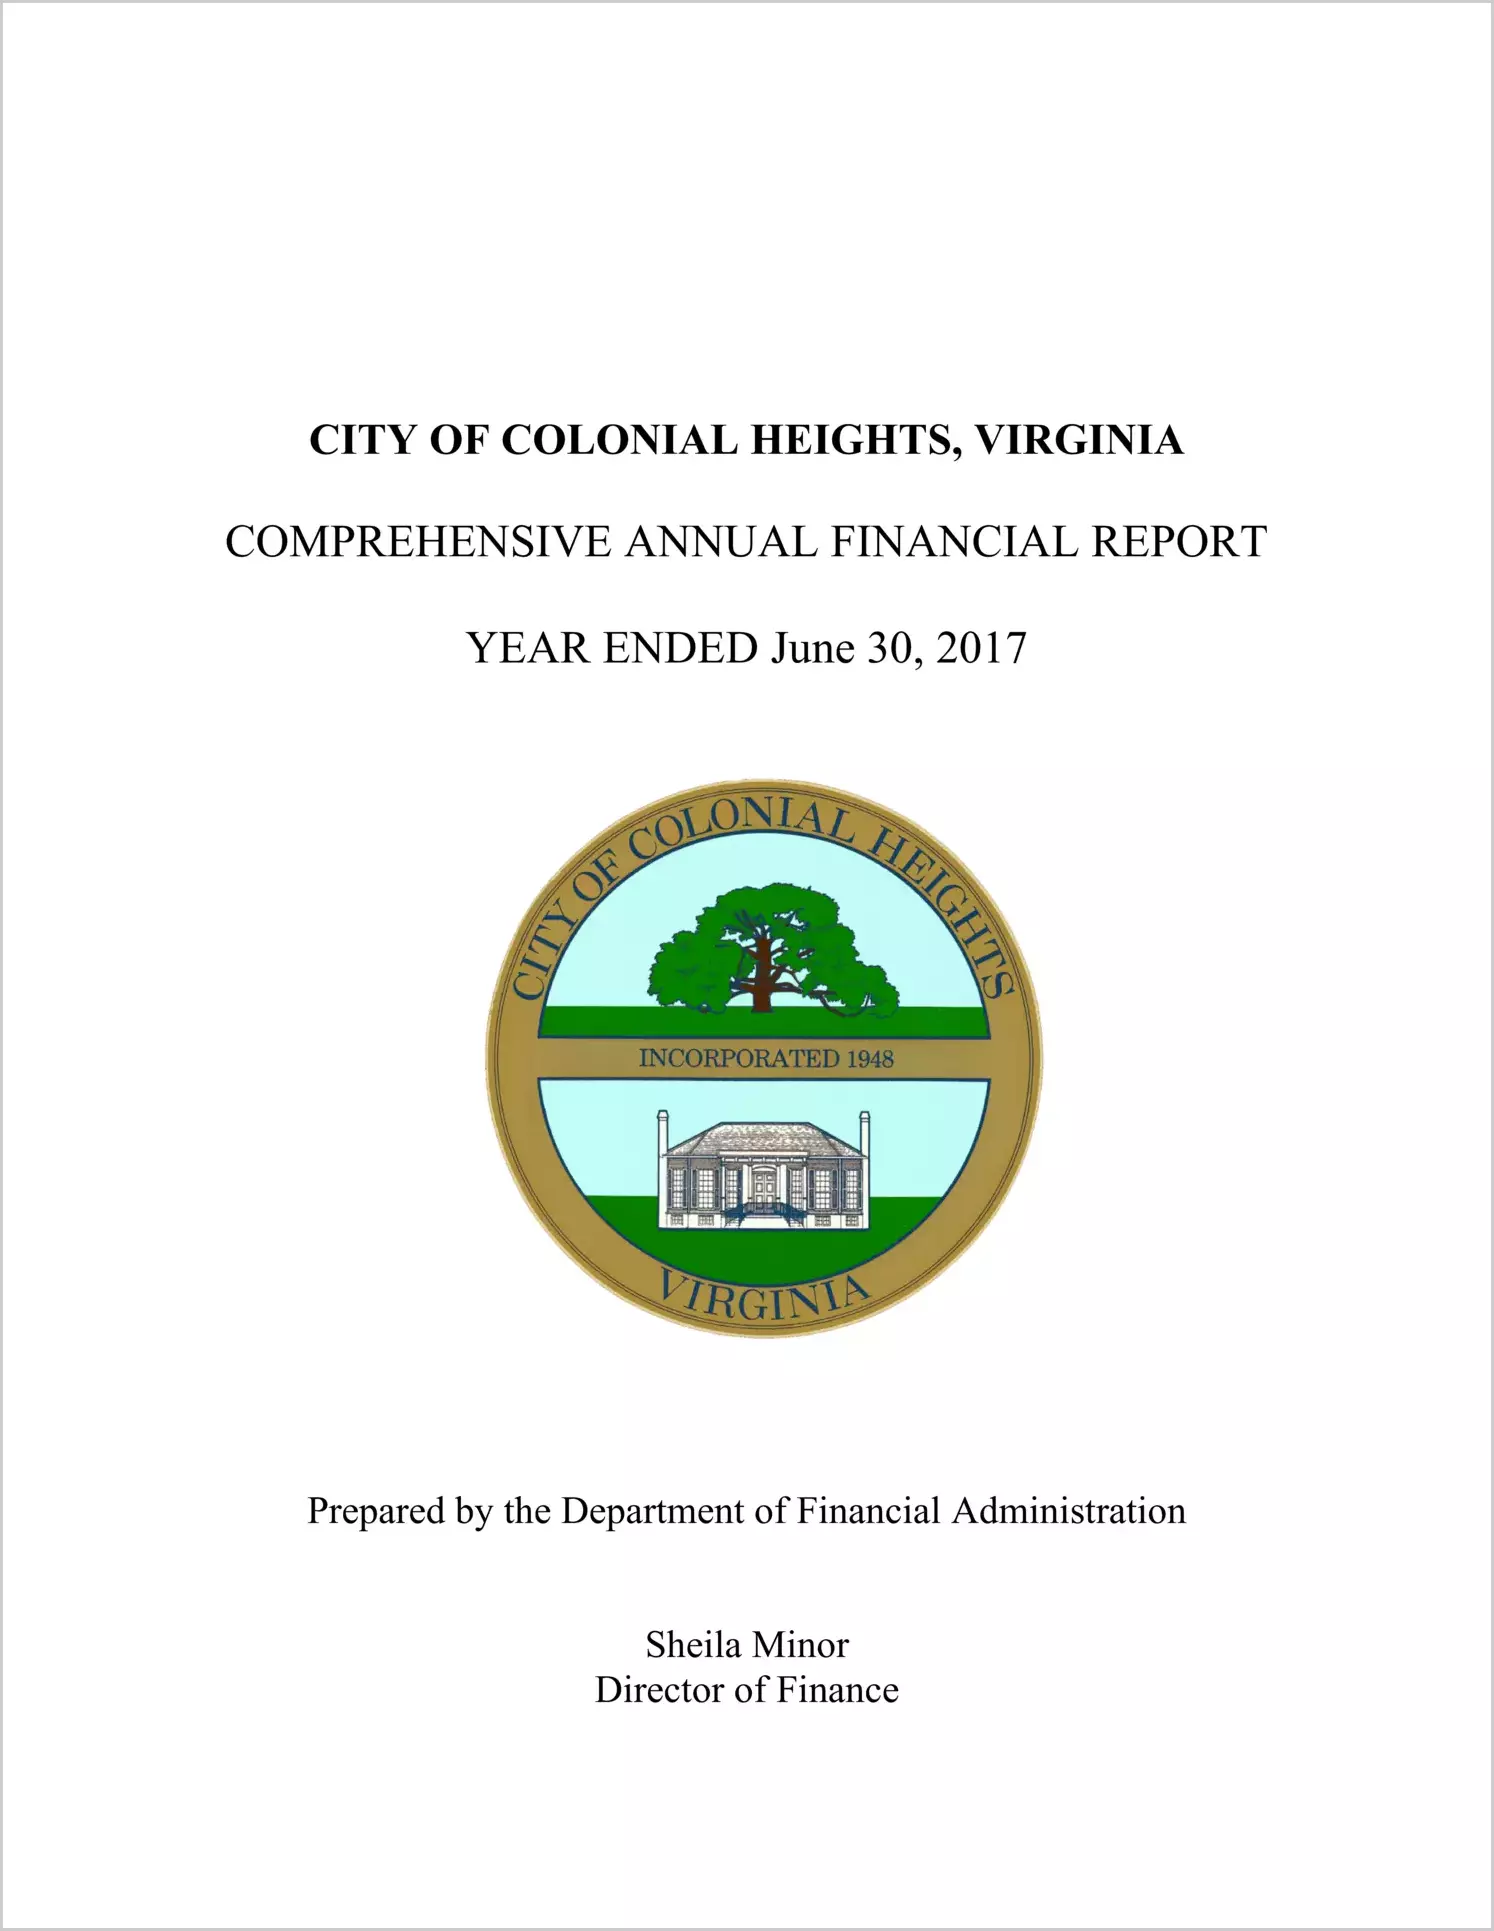 2017 Annual Financial Report for City of Colonial Heights